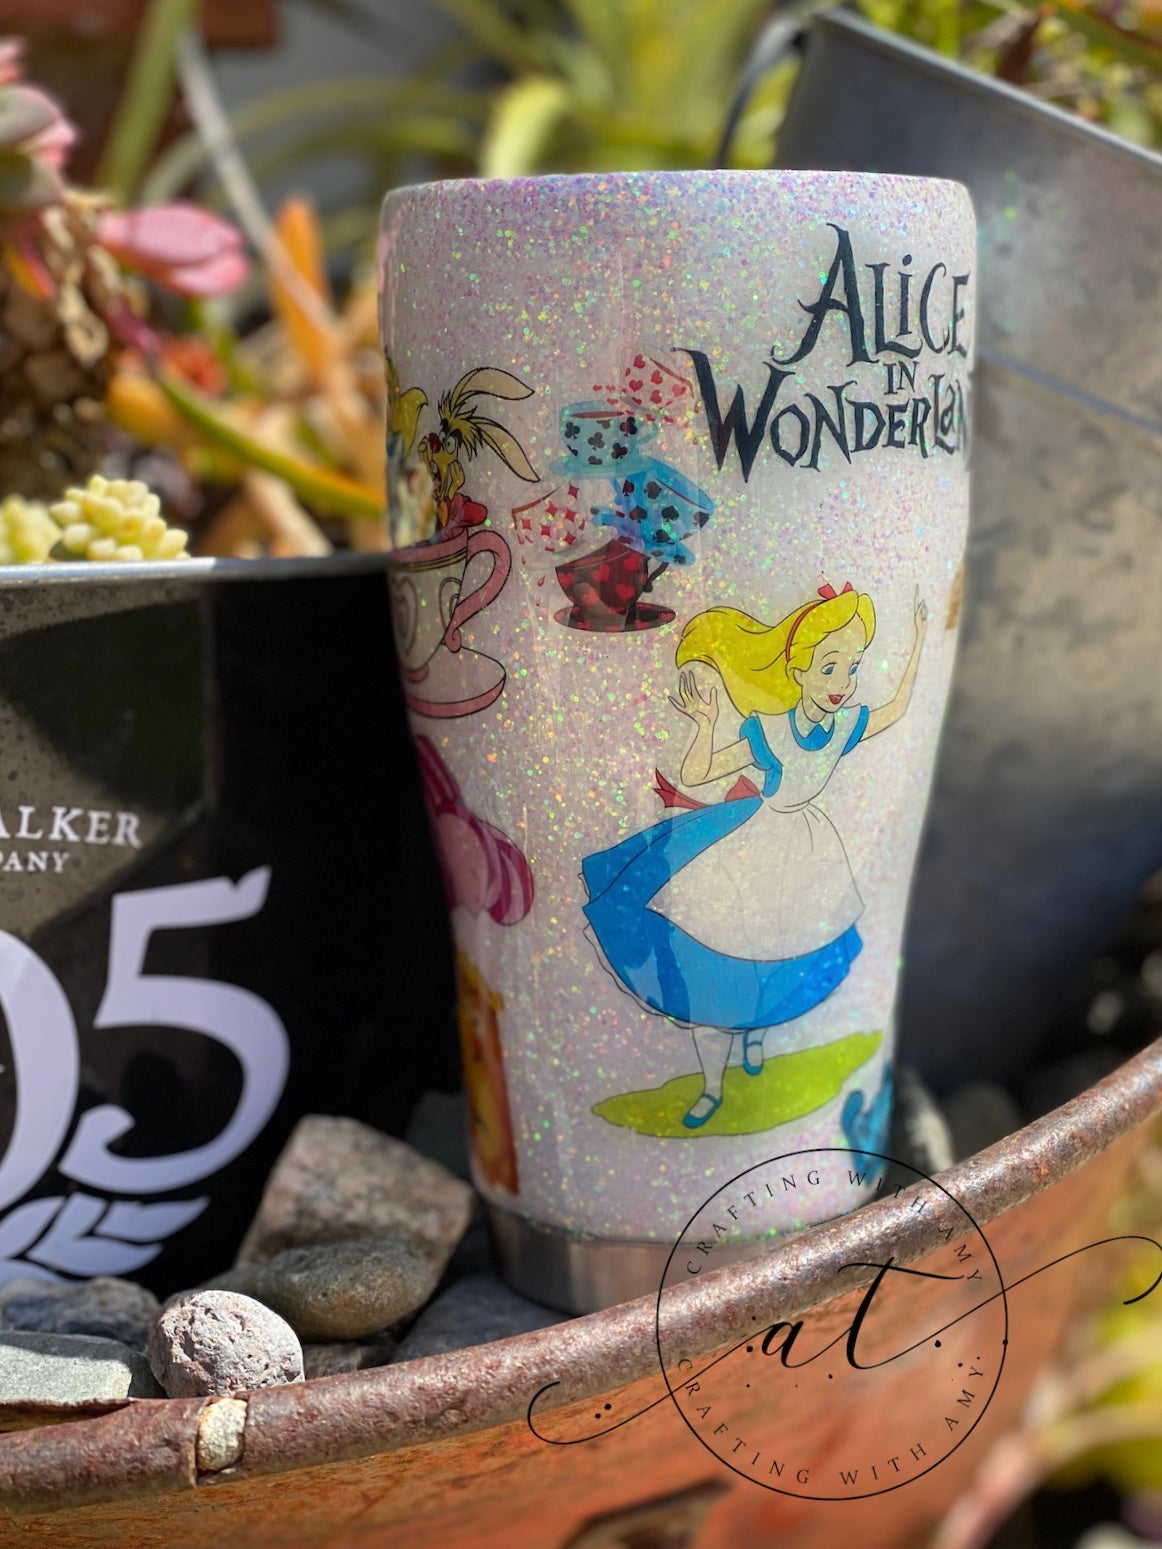 Alice in Wonderland tumbler, Alice in Wonderland tumbler, glitter Alice in wonderland, Alice in wonderland, custom tumbler, glitter, tumbler, epoxy tumbler freeshipping - CraftingwithAmy